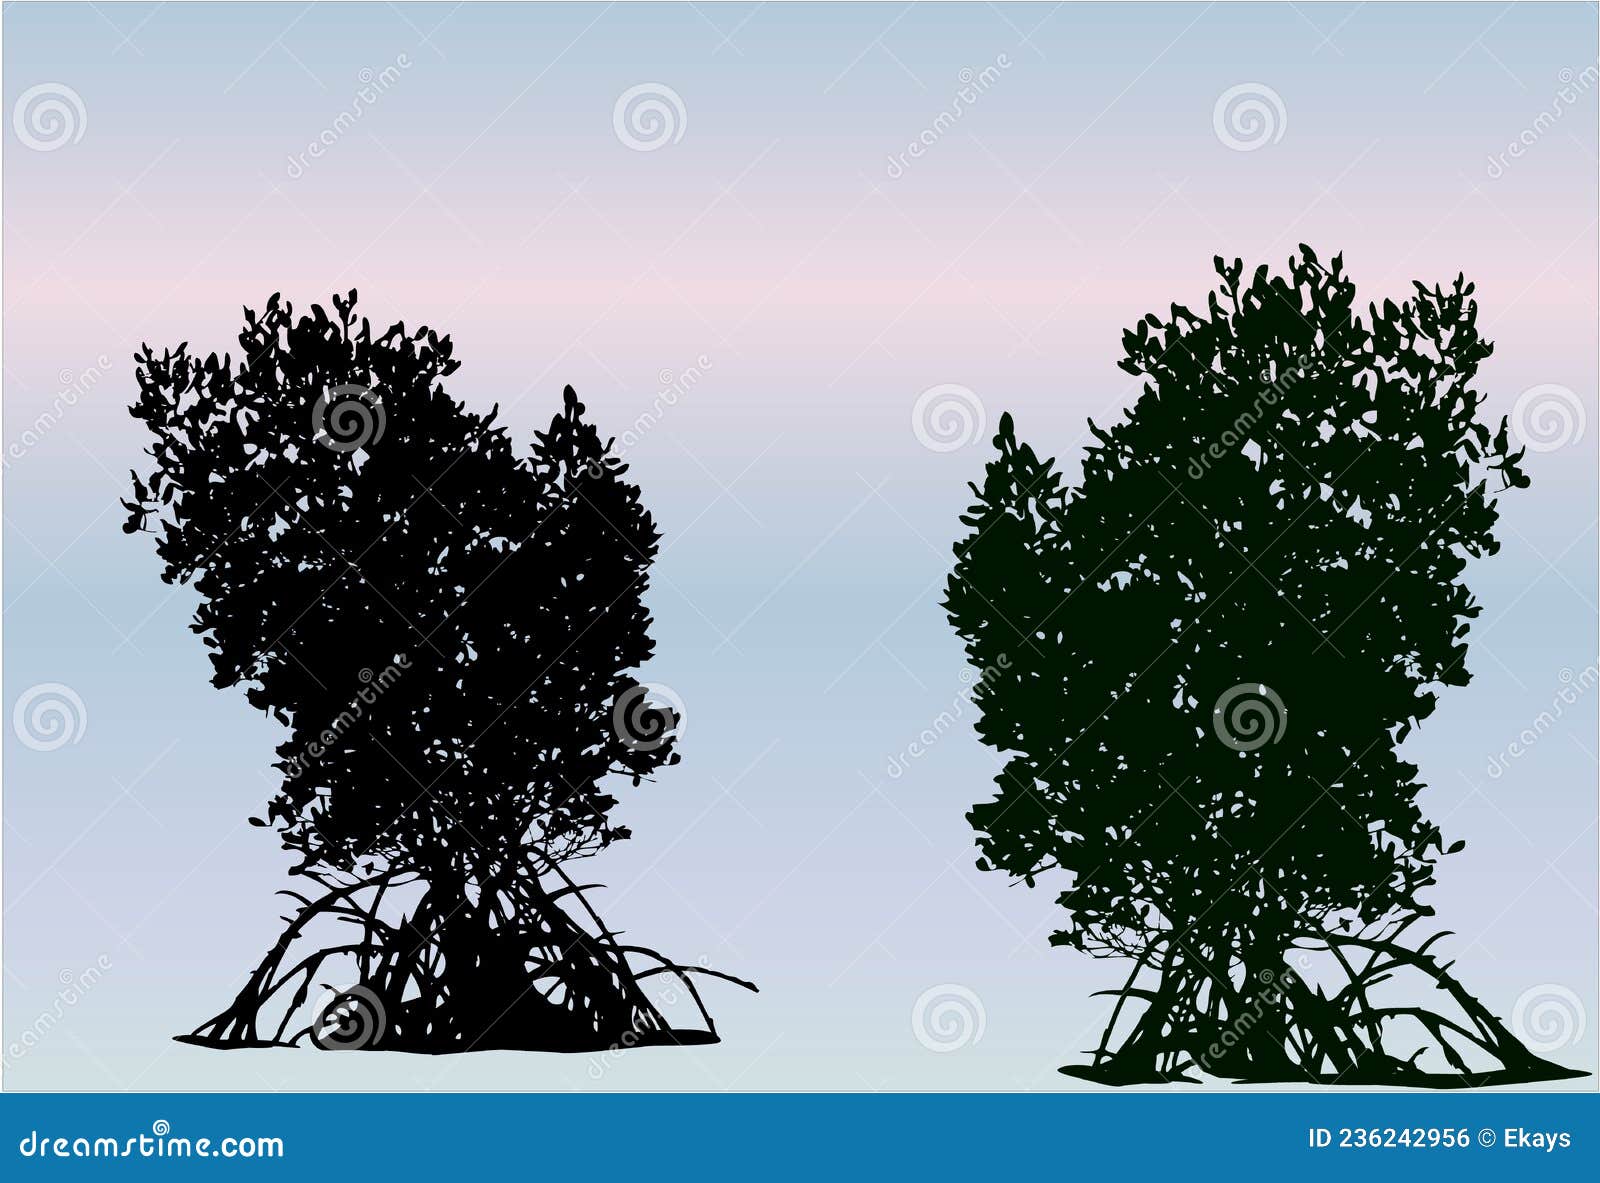 mangrove trees silhouette with blue and pink background